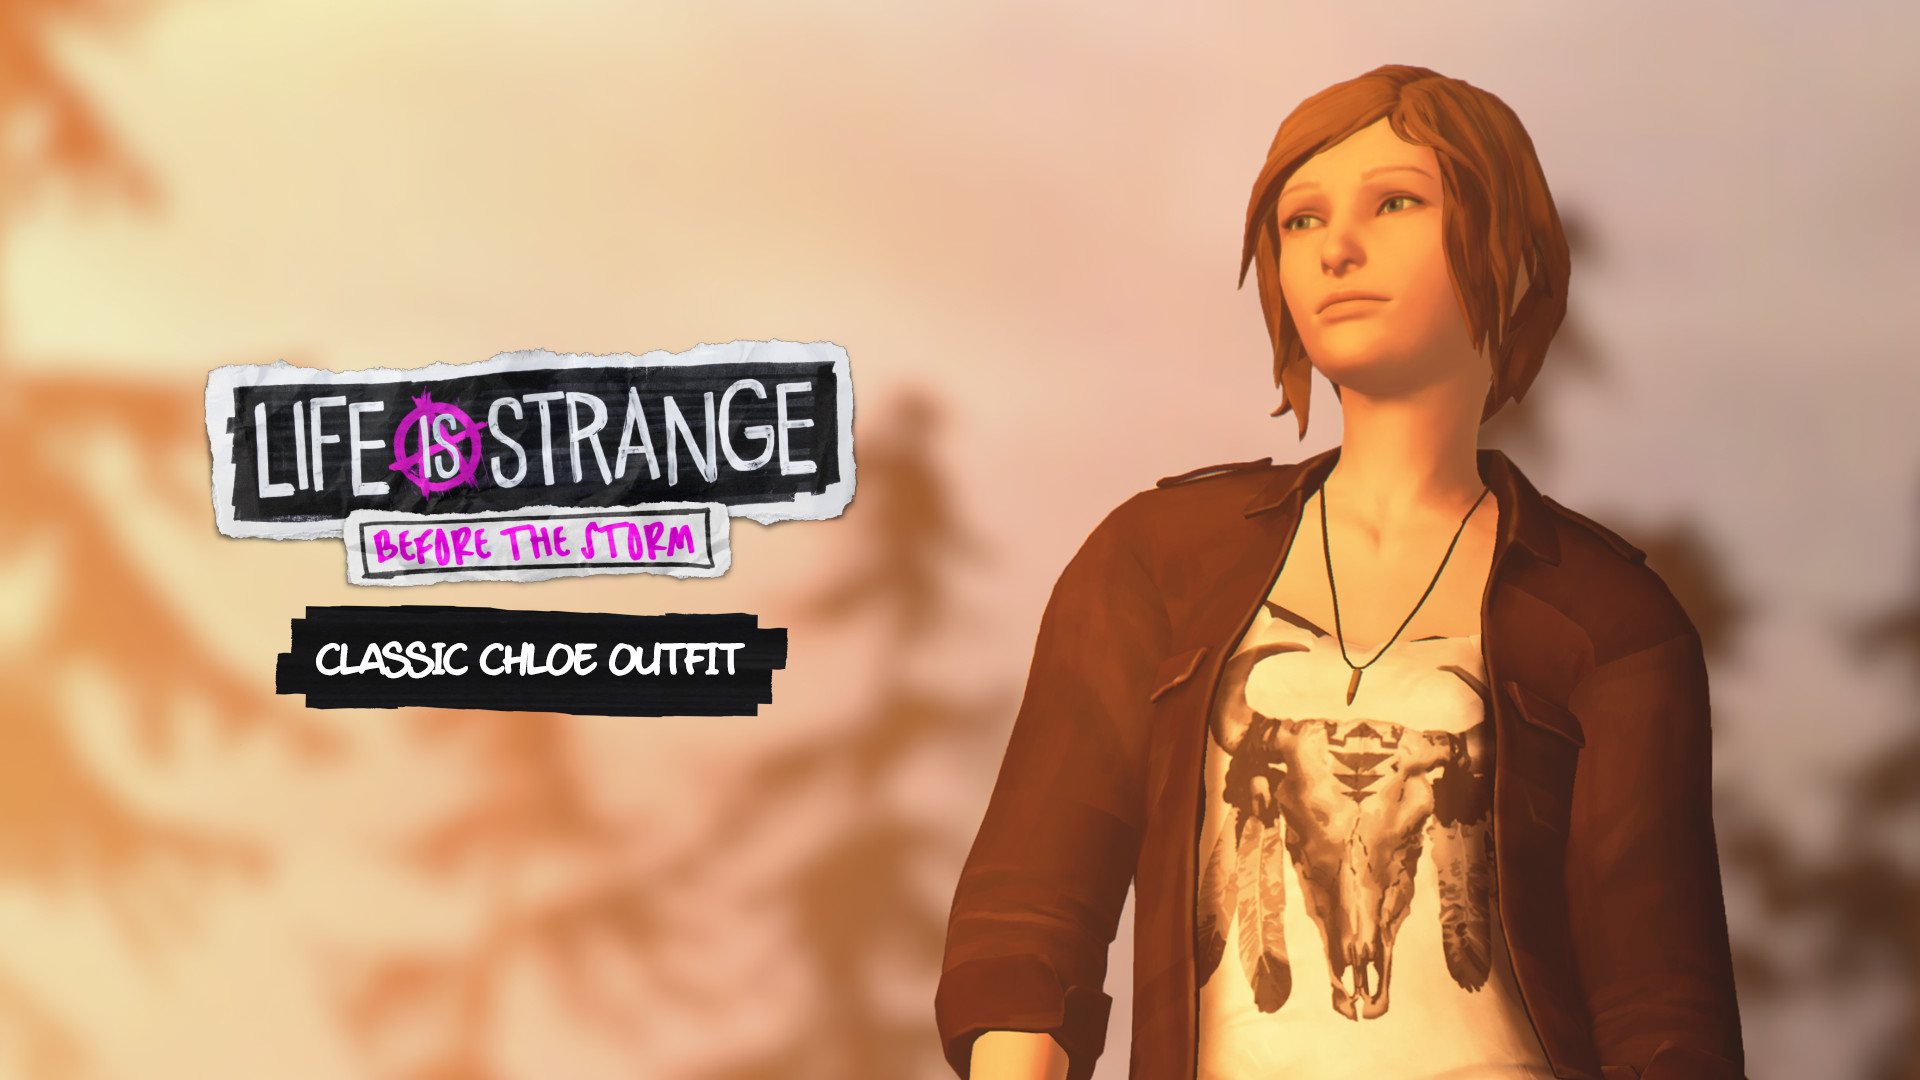 Life is Strange: Before the Storm - Classic Chloe Outfit Pack DLC XBOX One CD Key $0.89